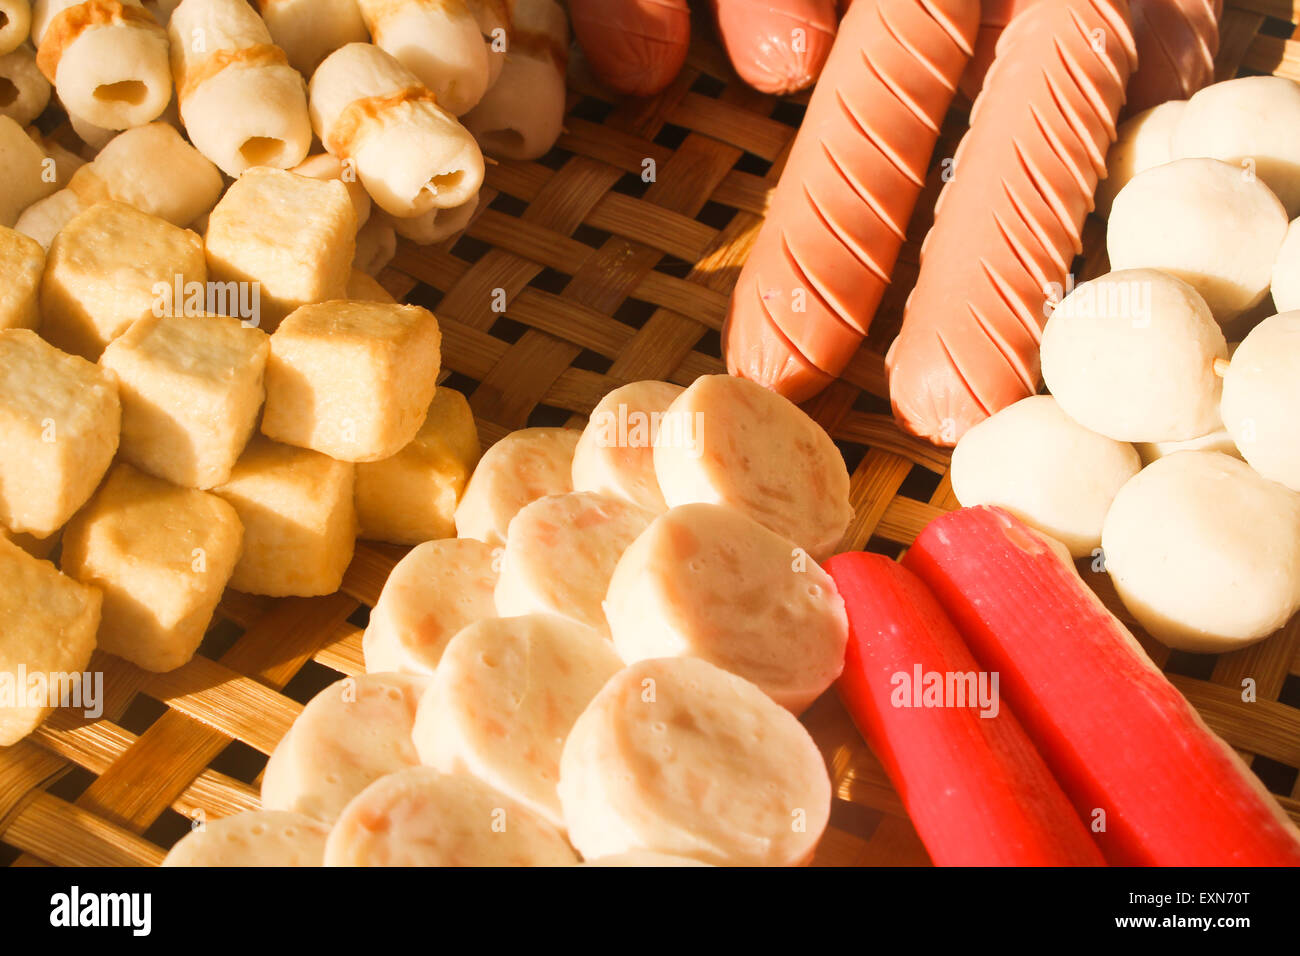 Meat ball in bamboo basket. Stock Photo